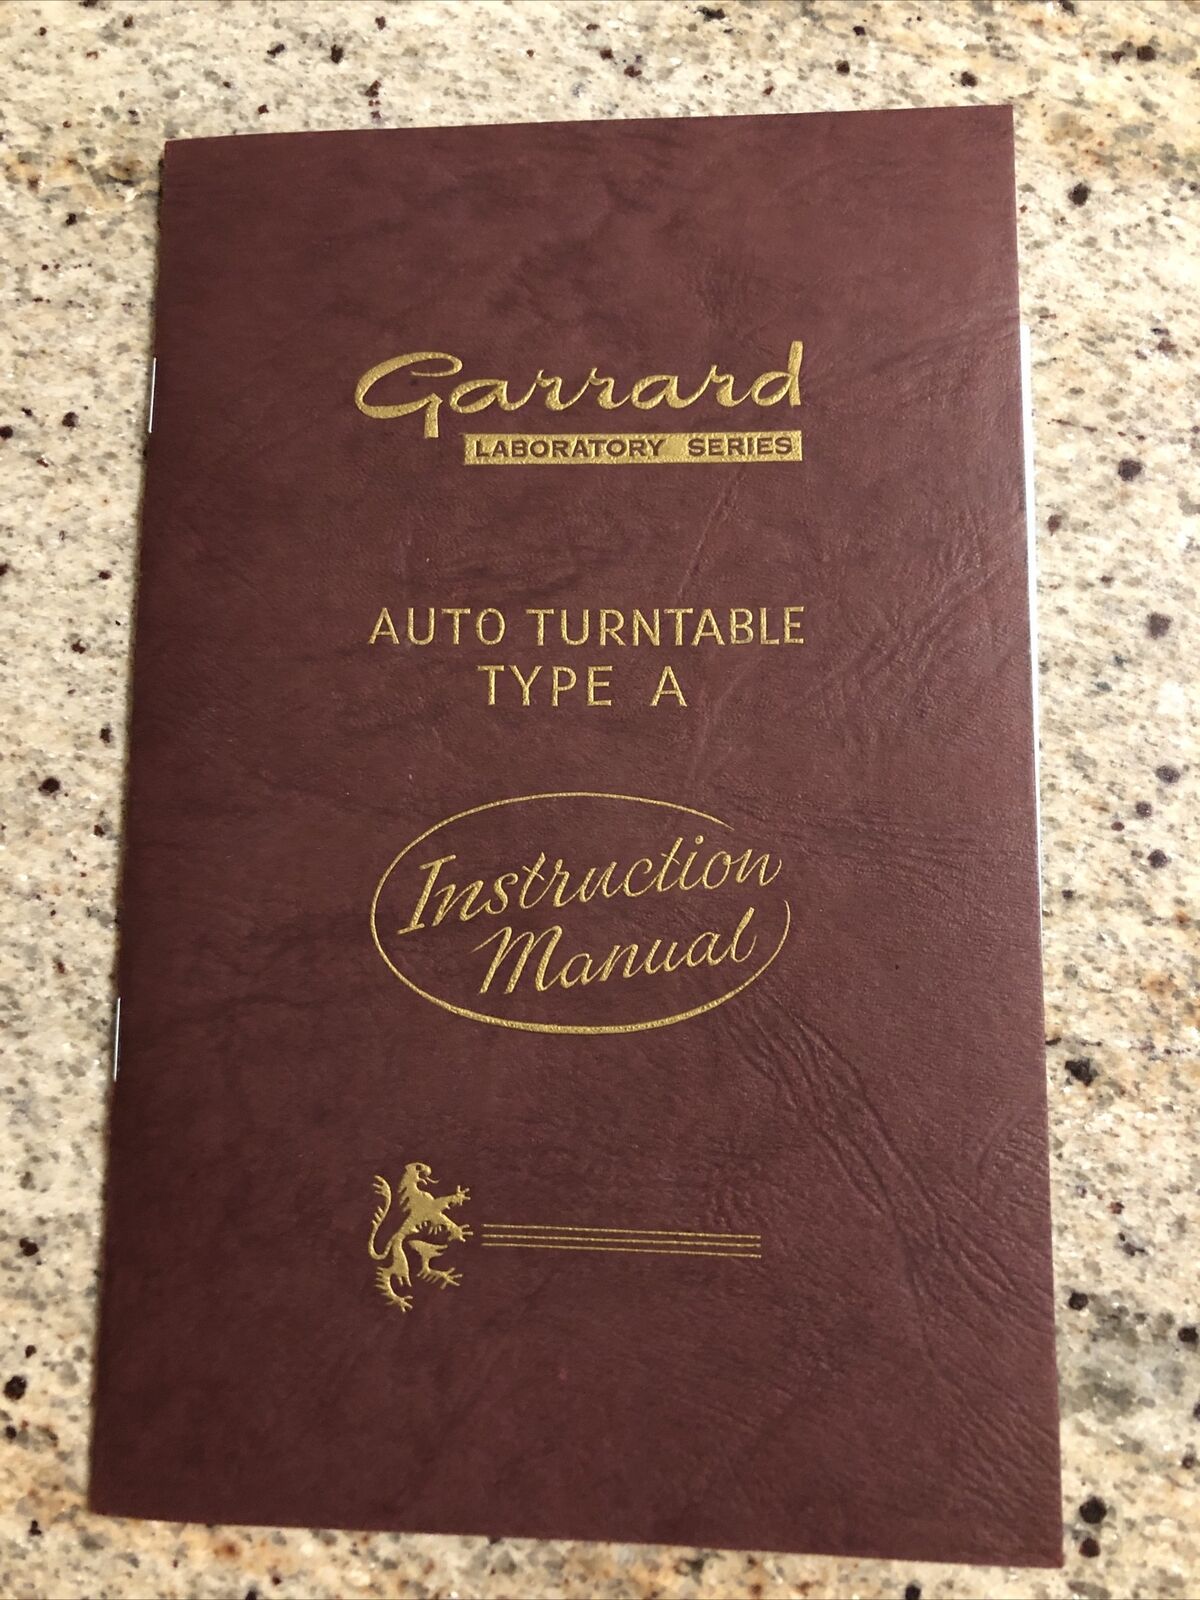 Mint Garrard Automatic Turntable Type A Instruction Owner\'s Manual & Schematic 